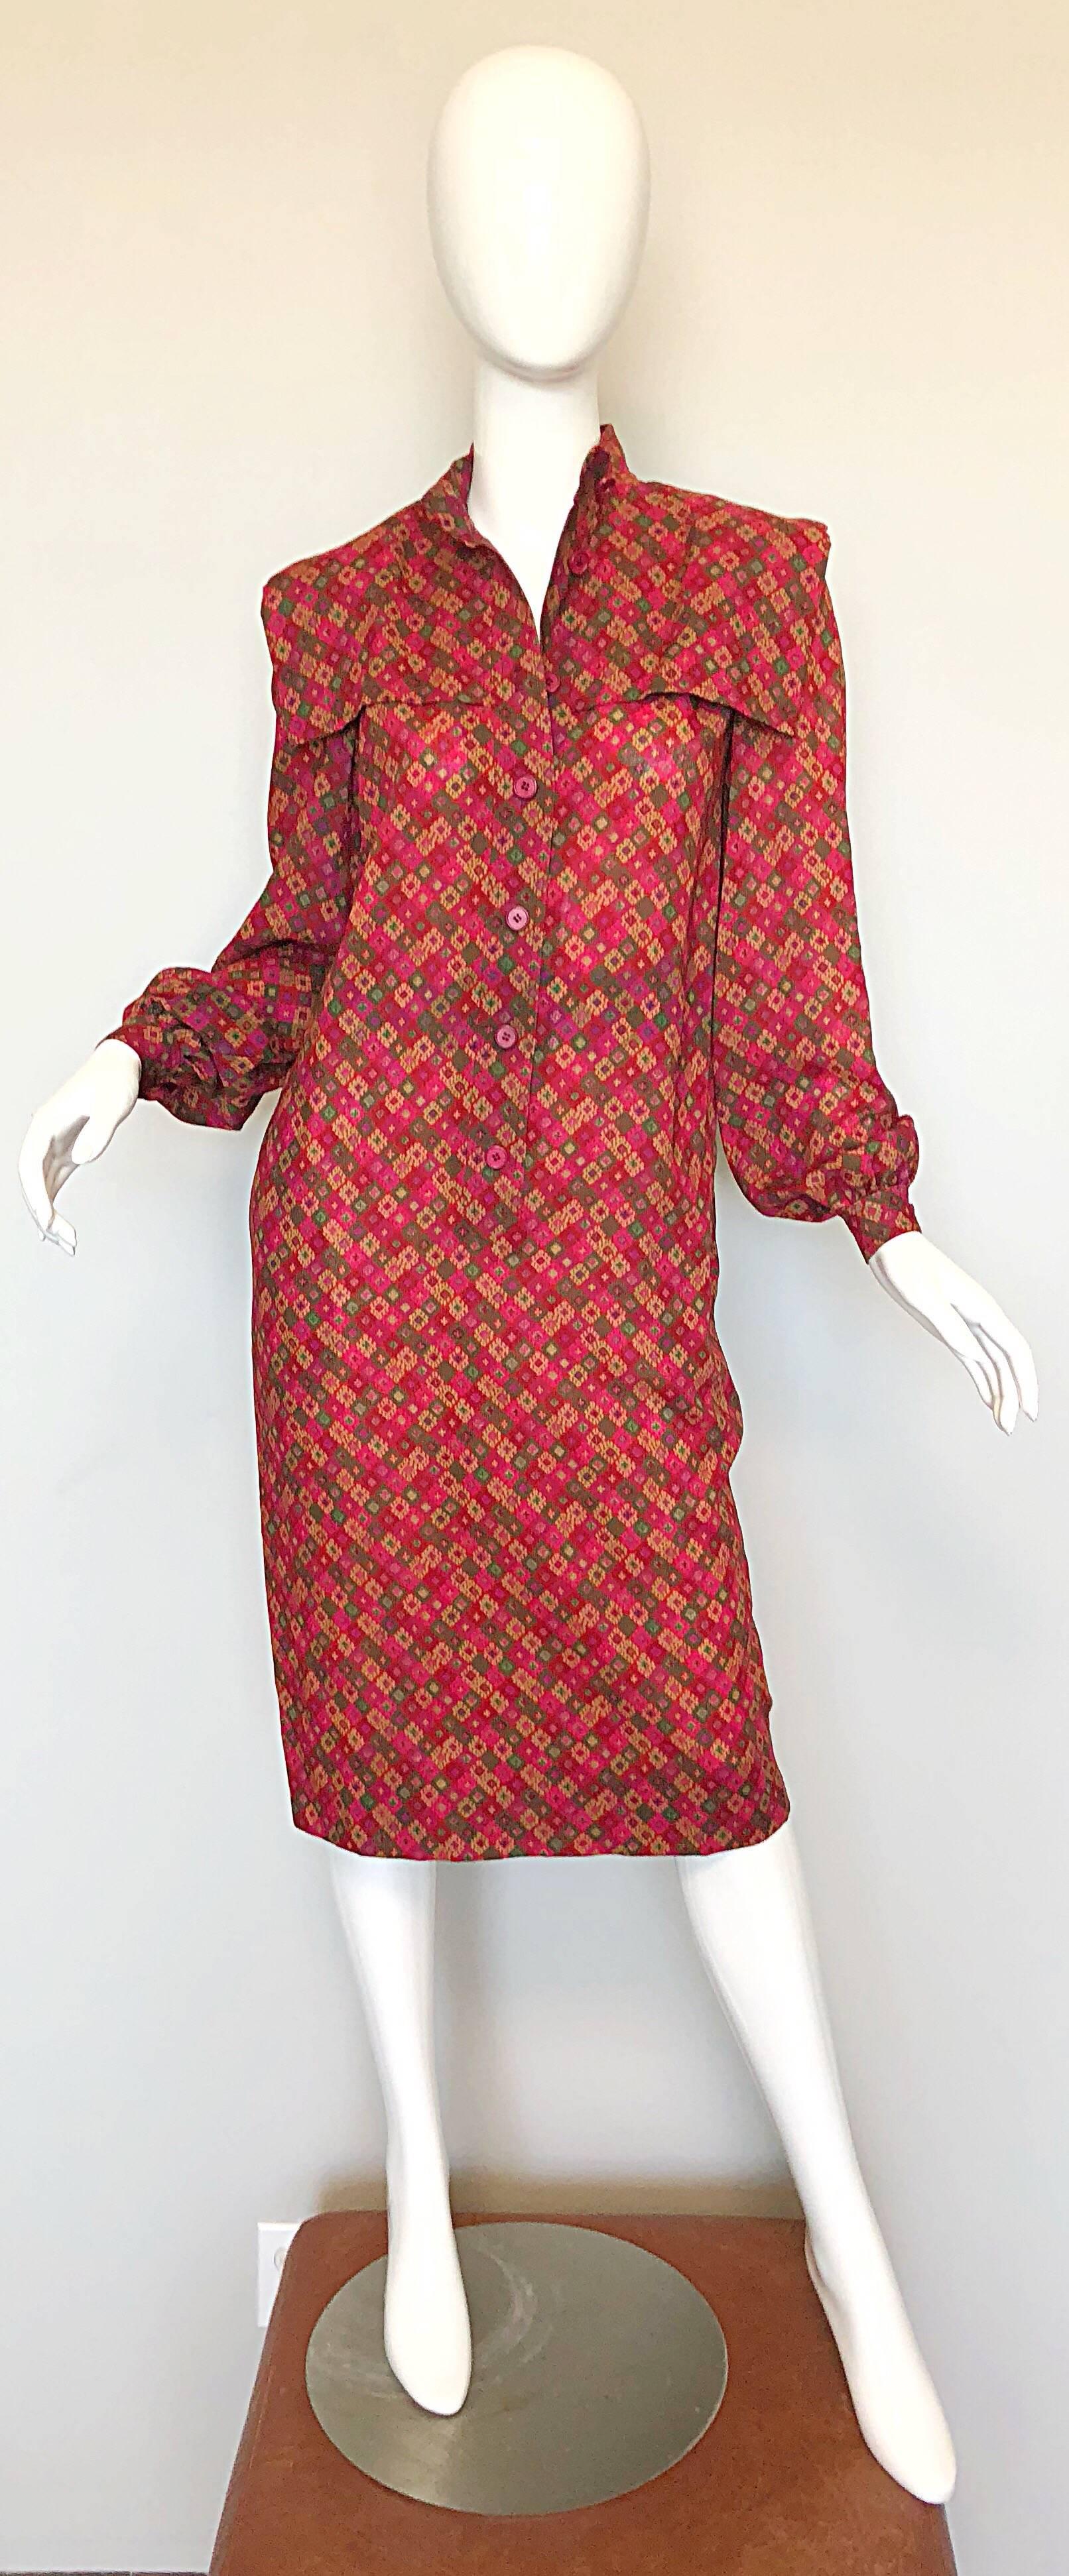 Chic 80s HUBERT DE GIVENCHY lightweight wool sac dress! Since Givenchy s unfortunate death last month, pieces actually designed by the legendary designer have become highly sought after. This beautiful gem was designed by the man